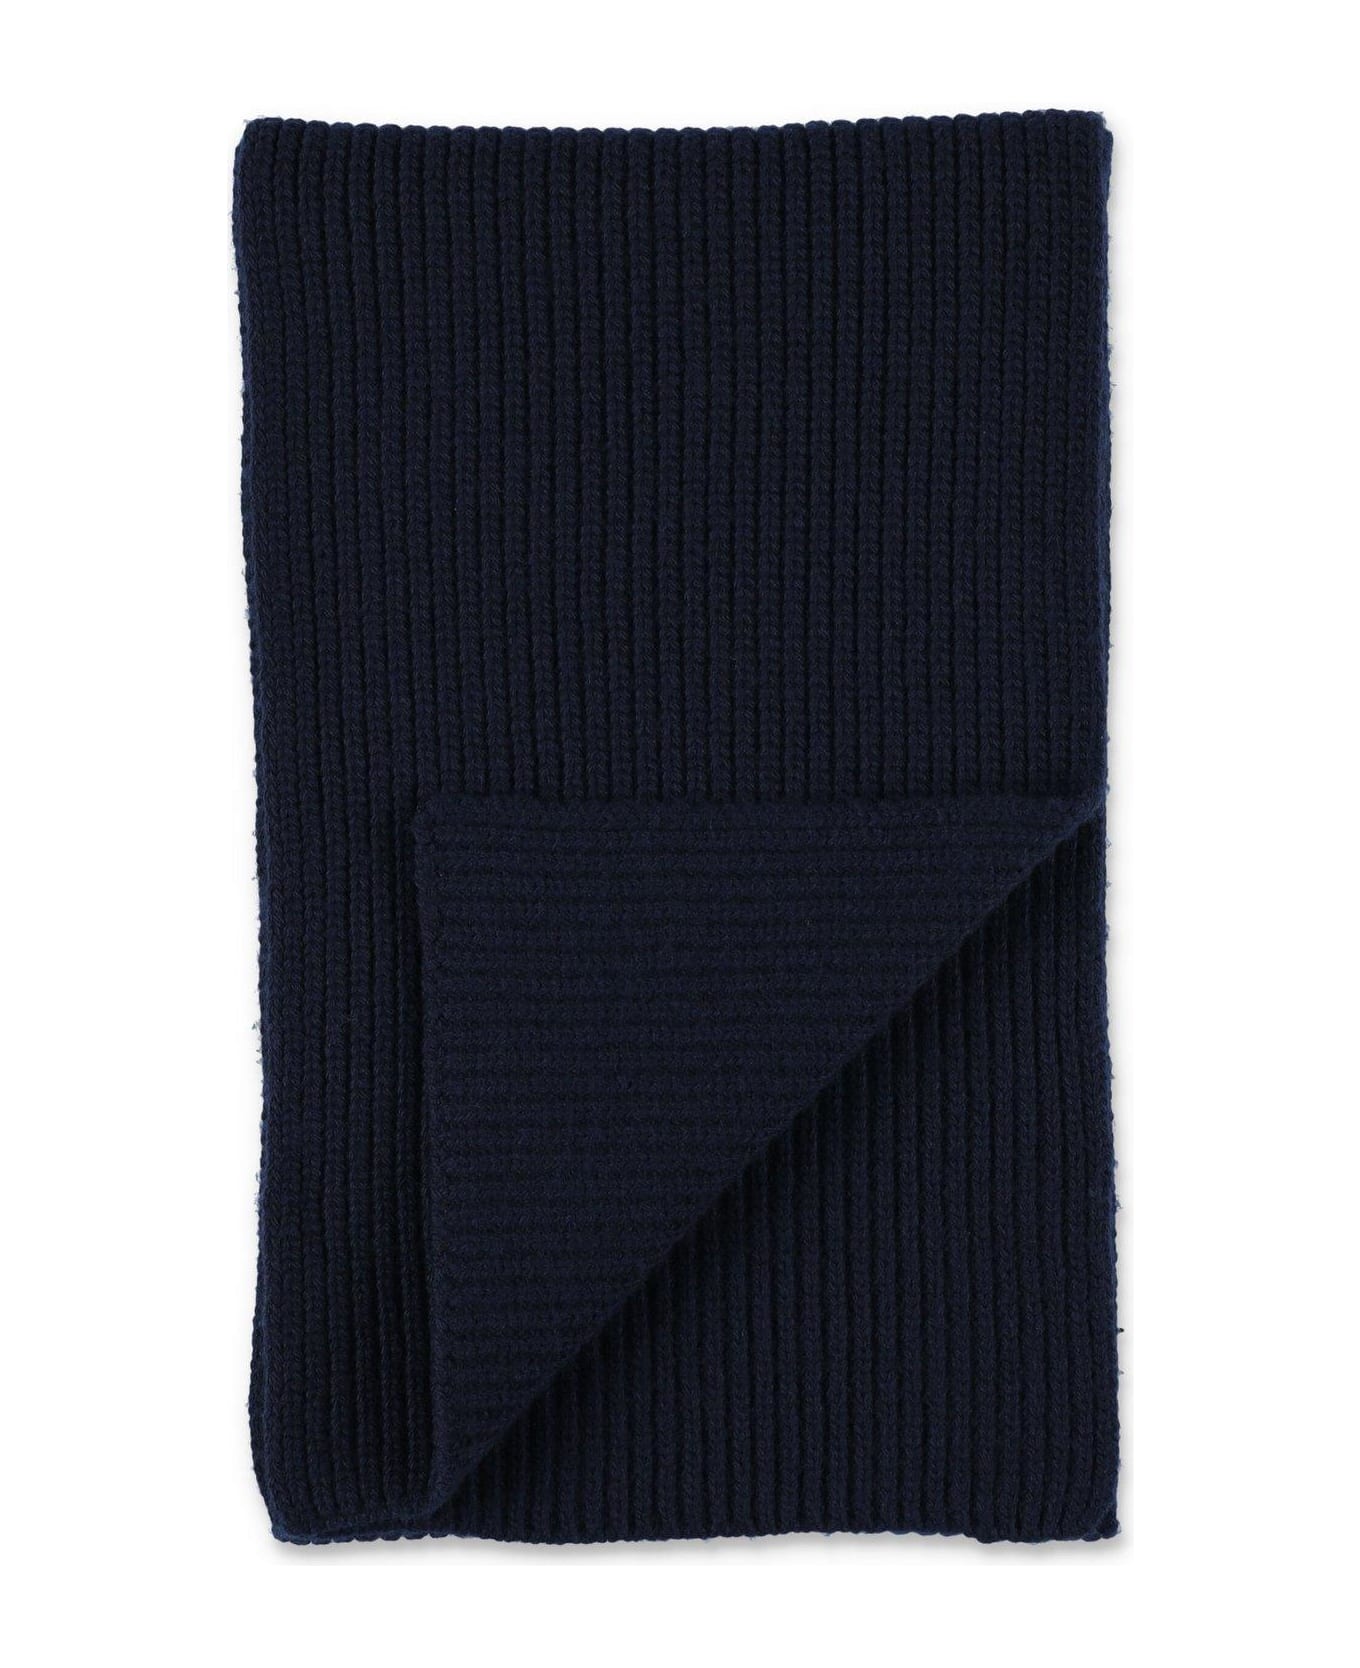 Stone Island Logo Patch Knitted Scarf - NAVY BLUE